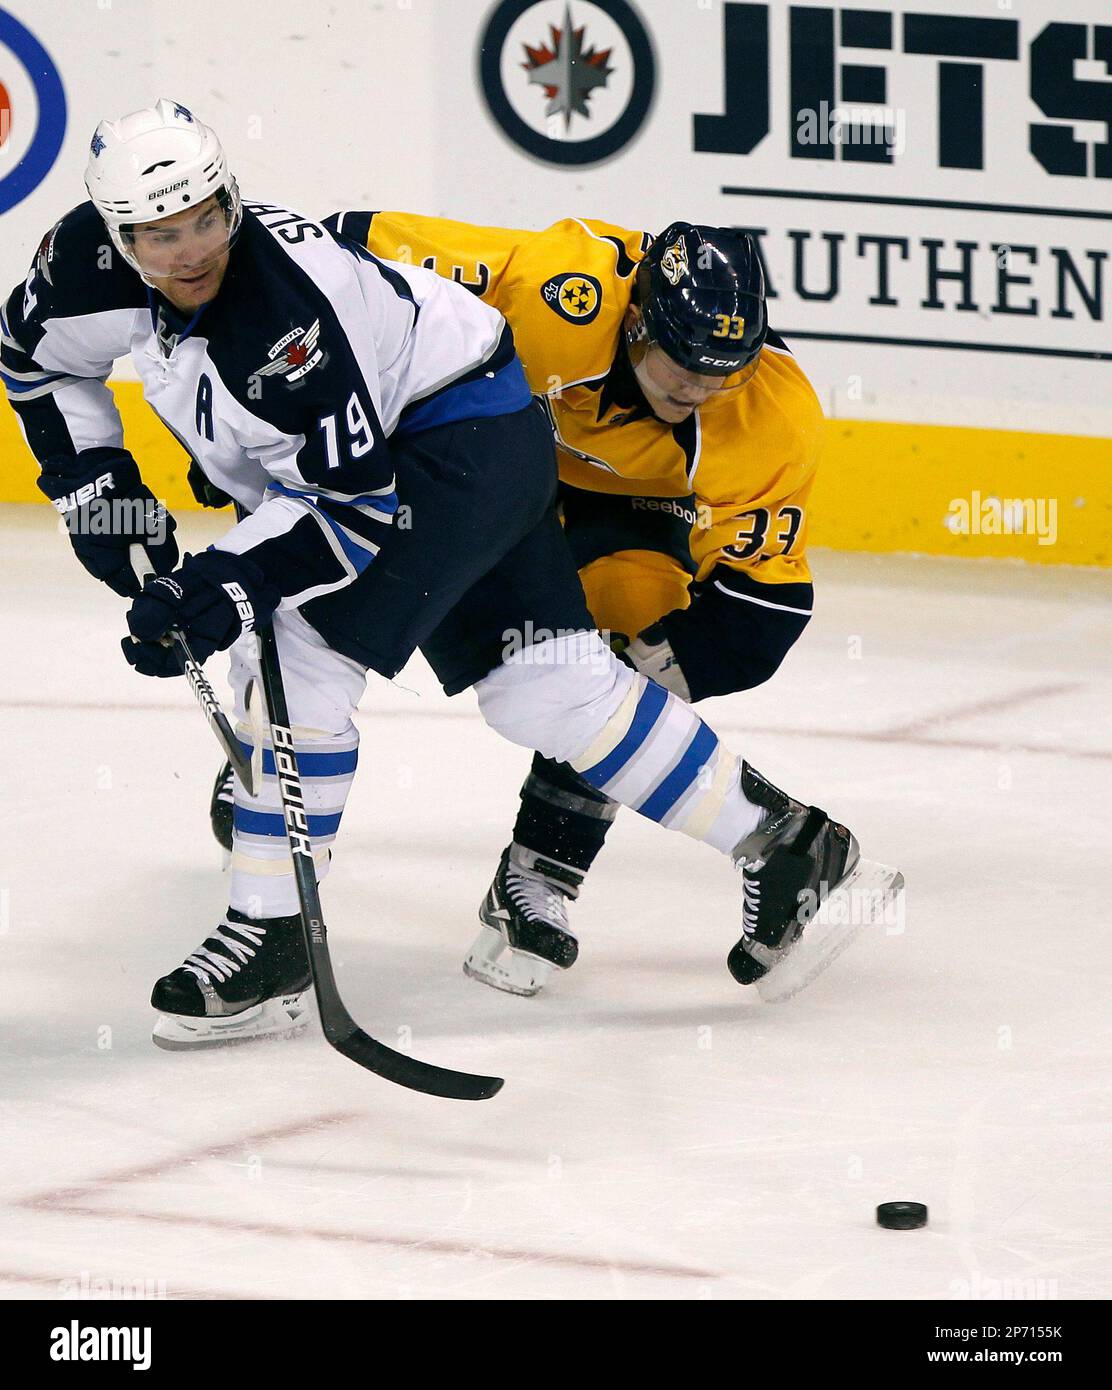 Winnipeg Jets Jim Slater, left, and Nashville Predators Colin Wilson collide during the first period of an NHL preseason hockey game against the Winnipeg Jets in Winnipeg, Manitoba, on Friday, Sept